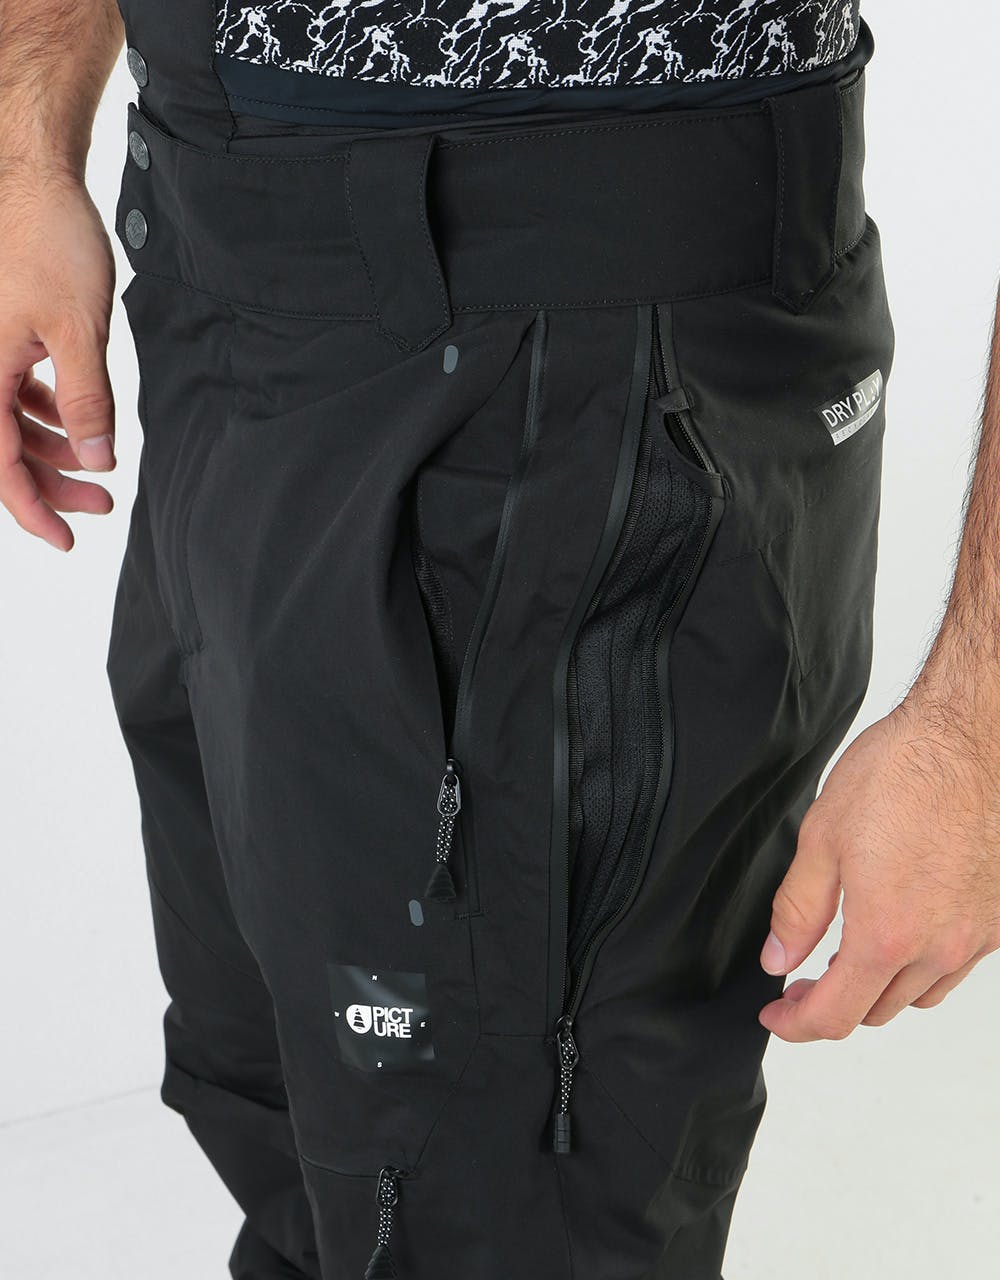 Picture Naikoon 2020 Snowboard Pants - Black